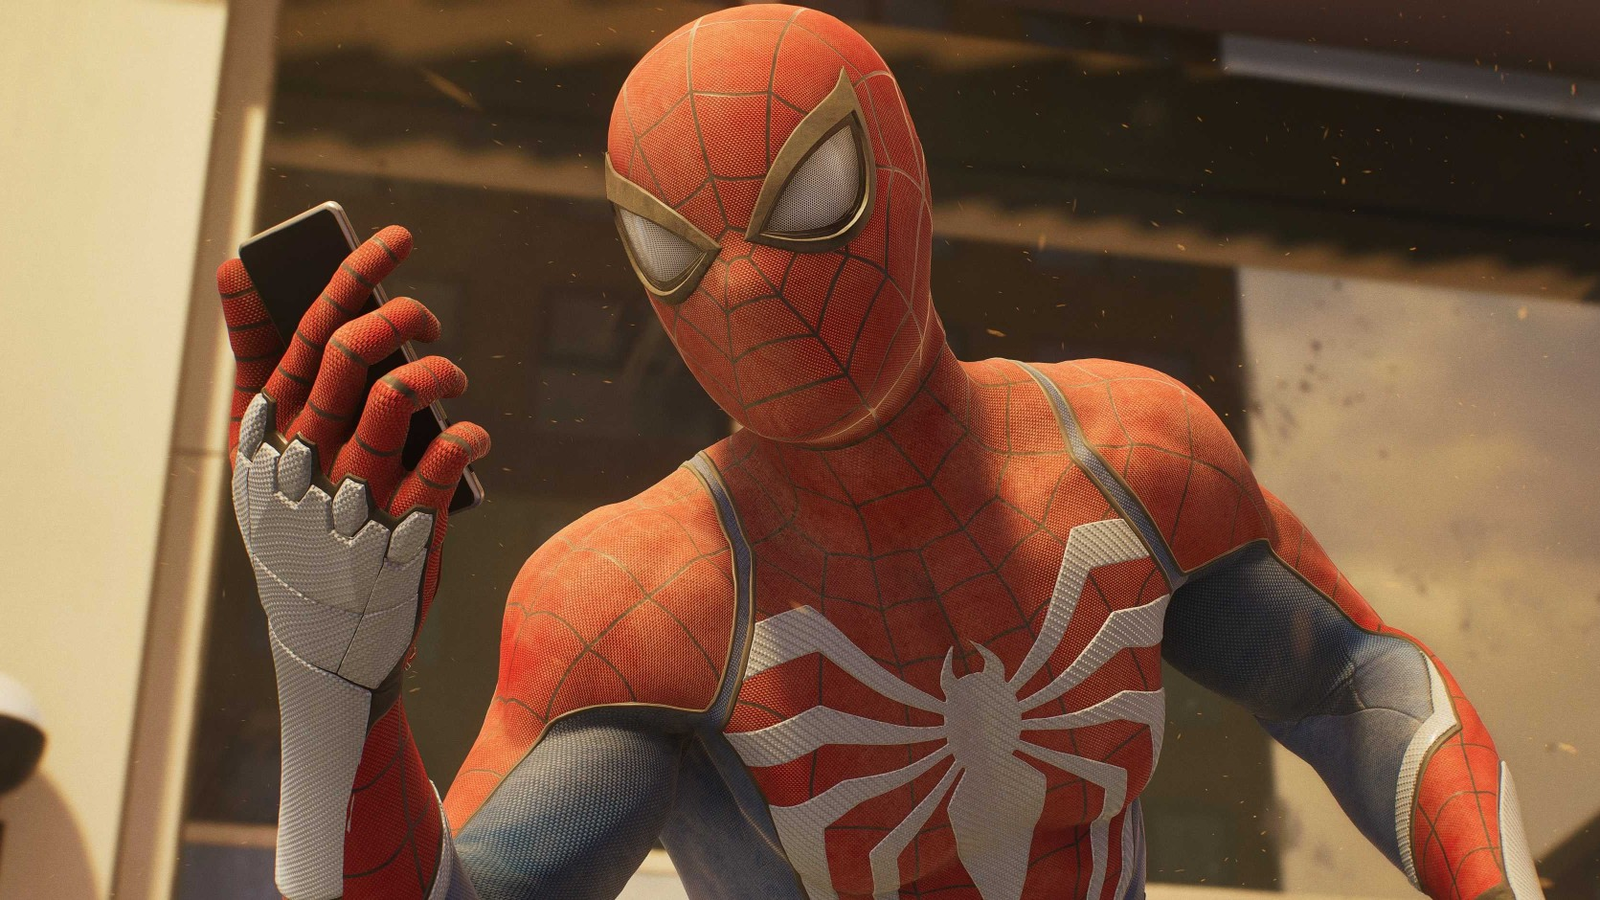 All Spider-Man games released so far - check prices & availability